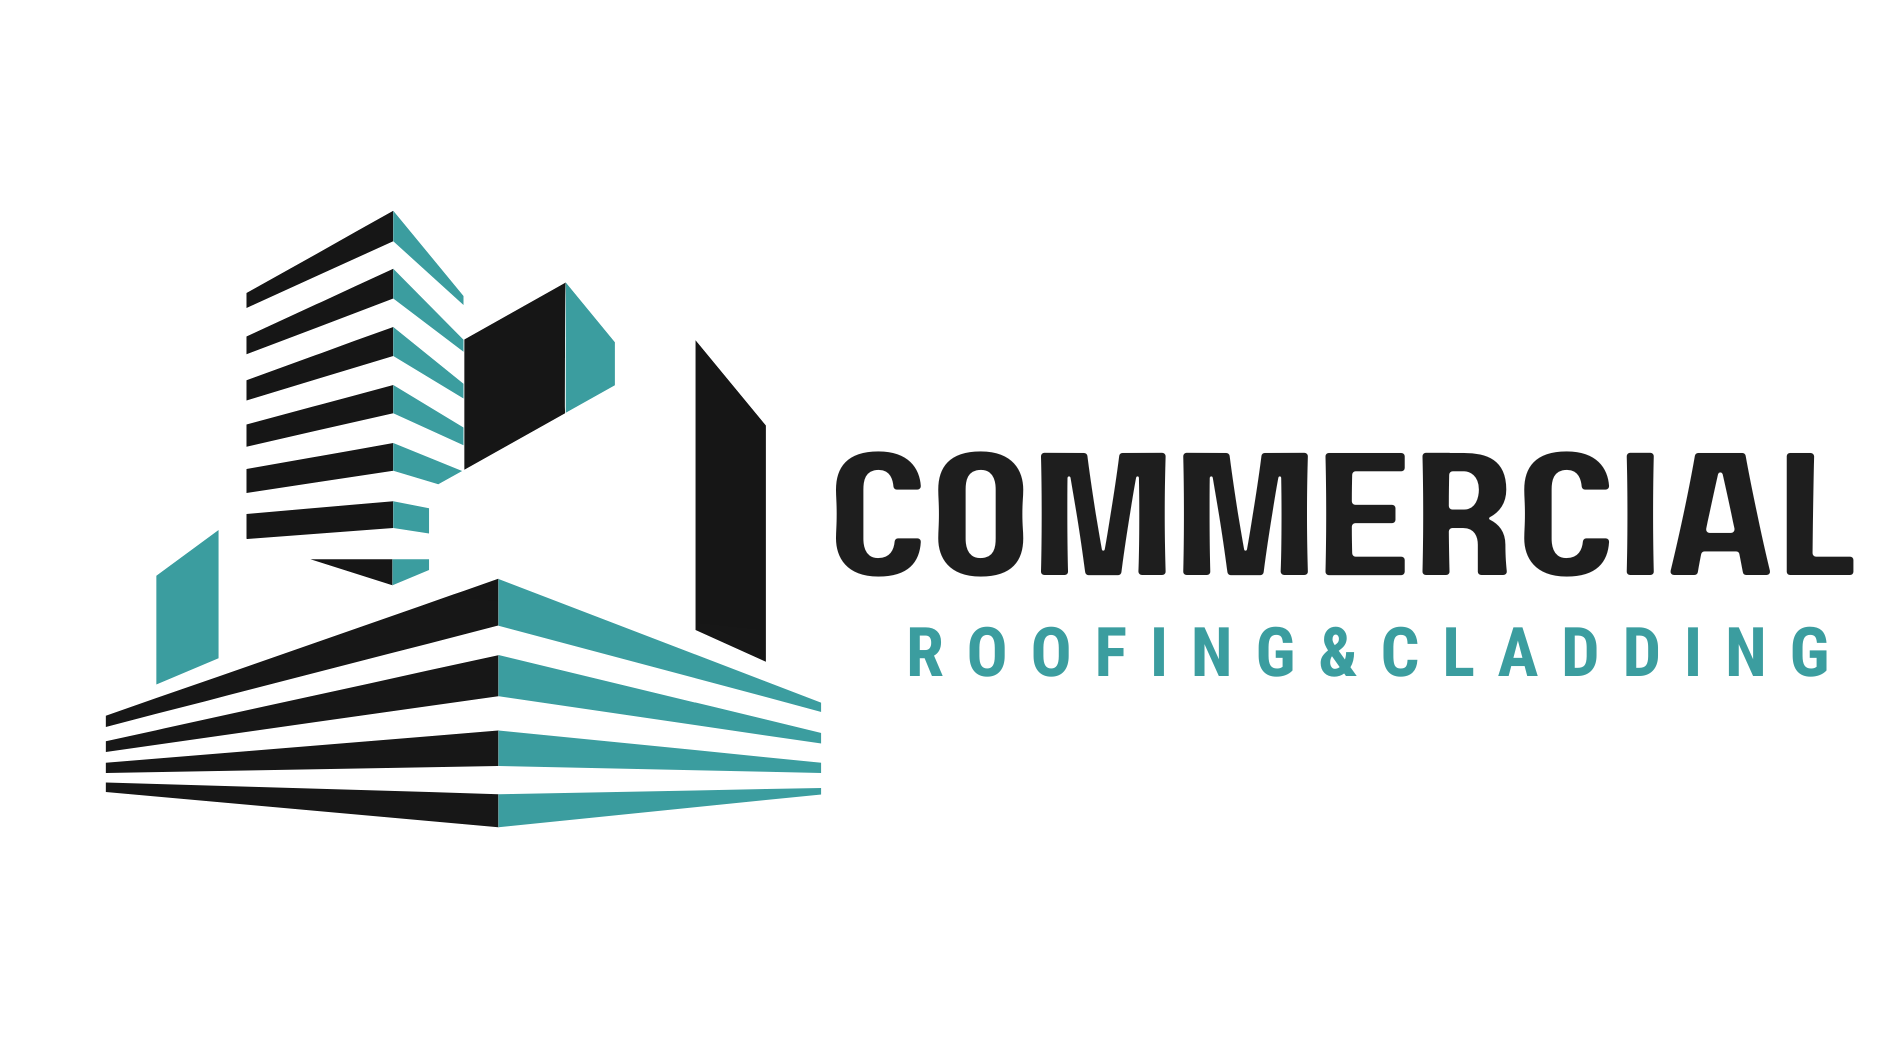 Logo of Commercial Roofing & Cladding Ltd Roofing Services In Polegate, East Sussex